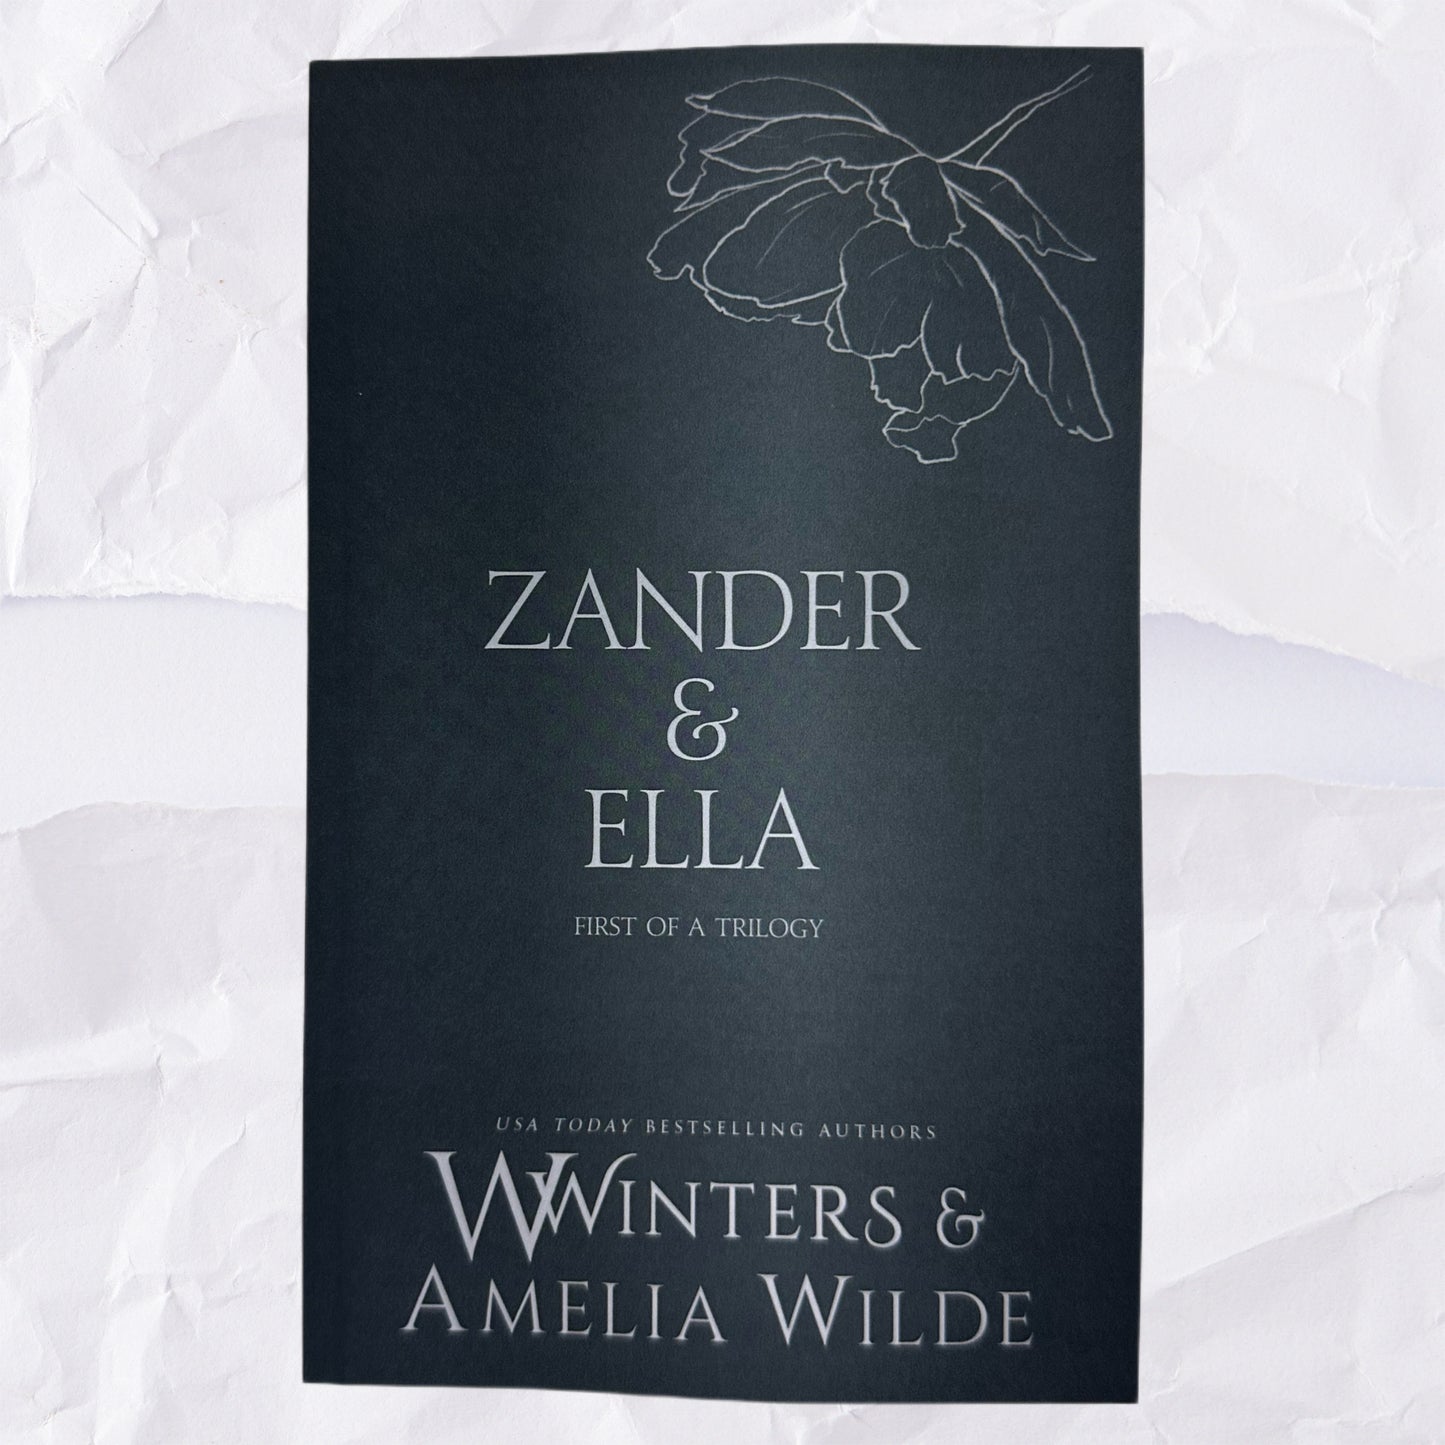 45) Zander & Ella - First of a Trilogy: Discreet Series by Willow Winters